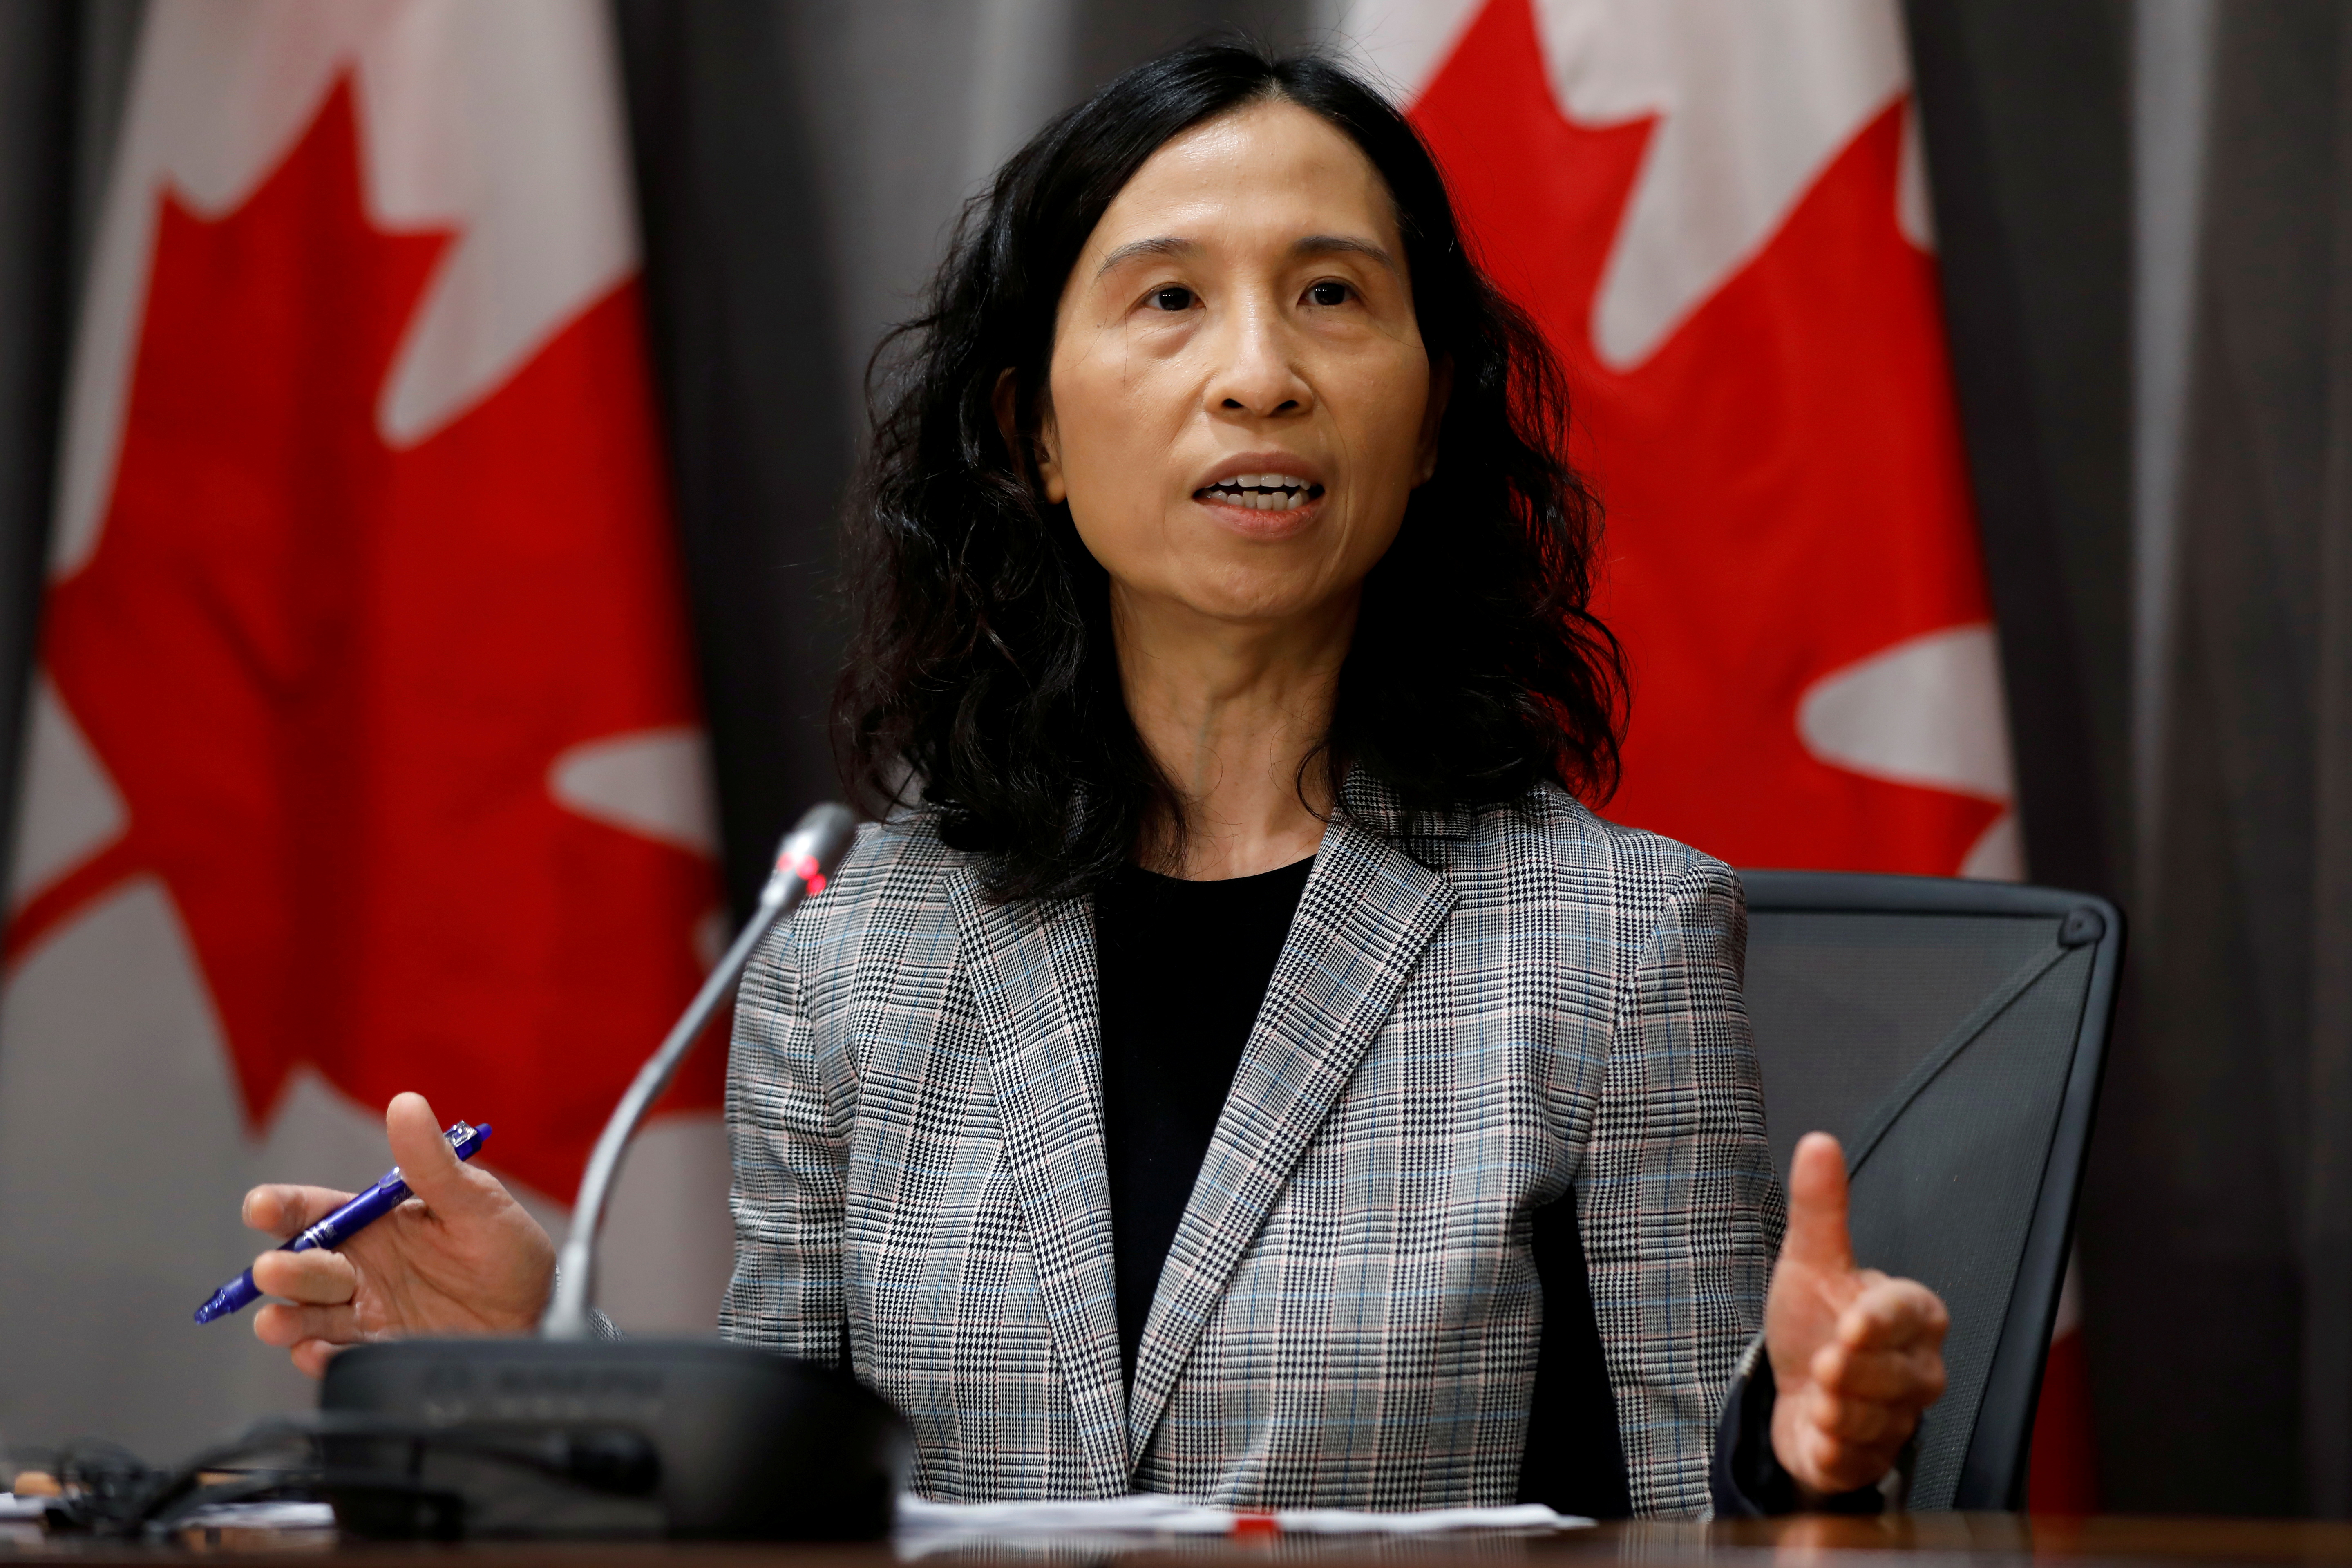 Canada's Chief Public Health Officer Dr. Theresa Tam attends a news conference as efforts continue to help slow the spread of coronavirus disease (COVID-19) in Ottawa